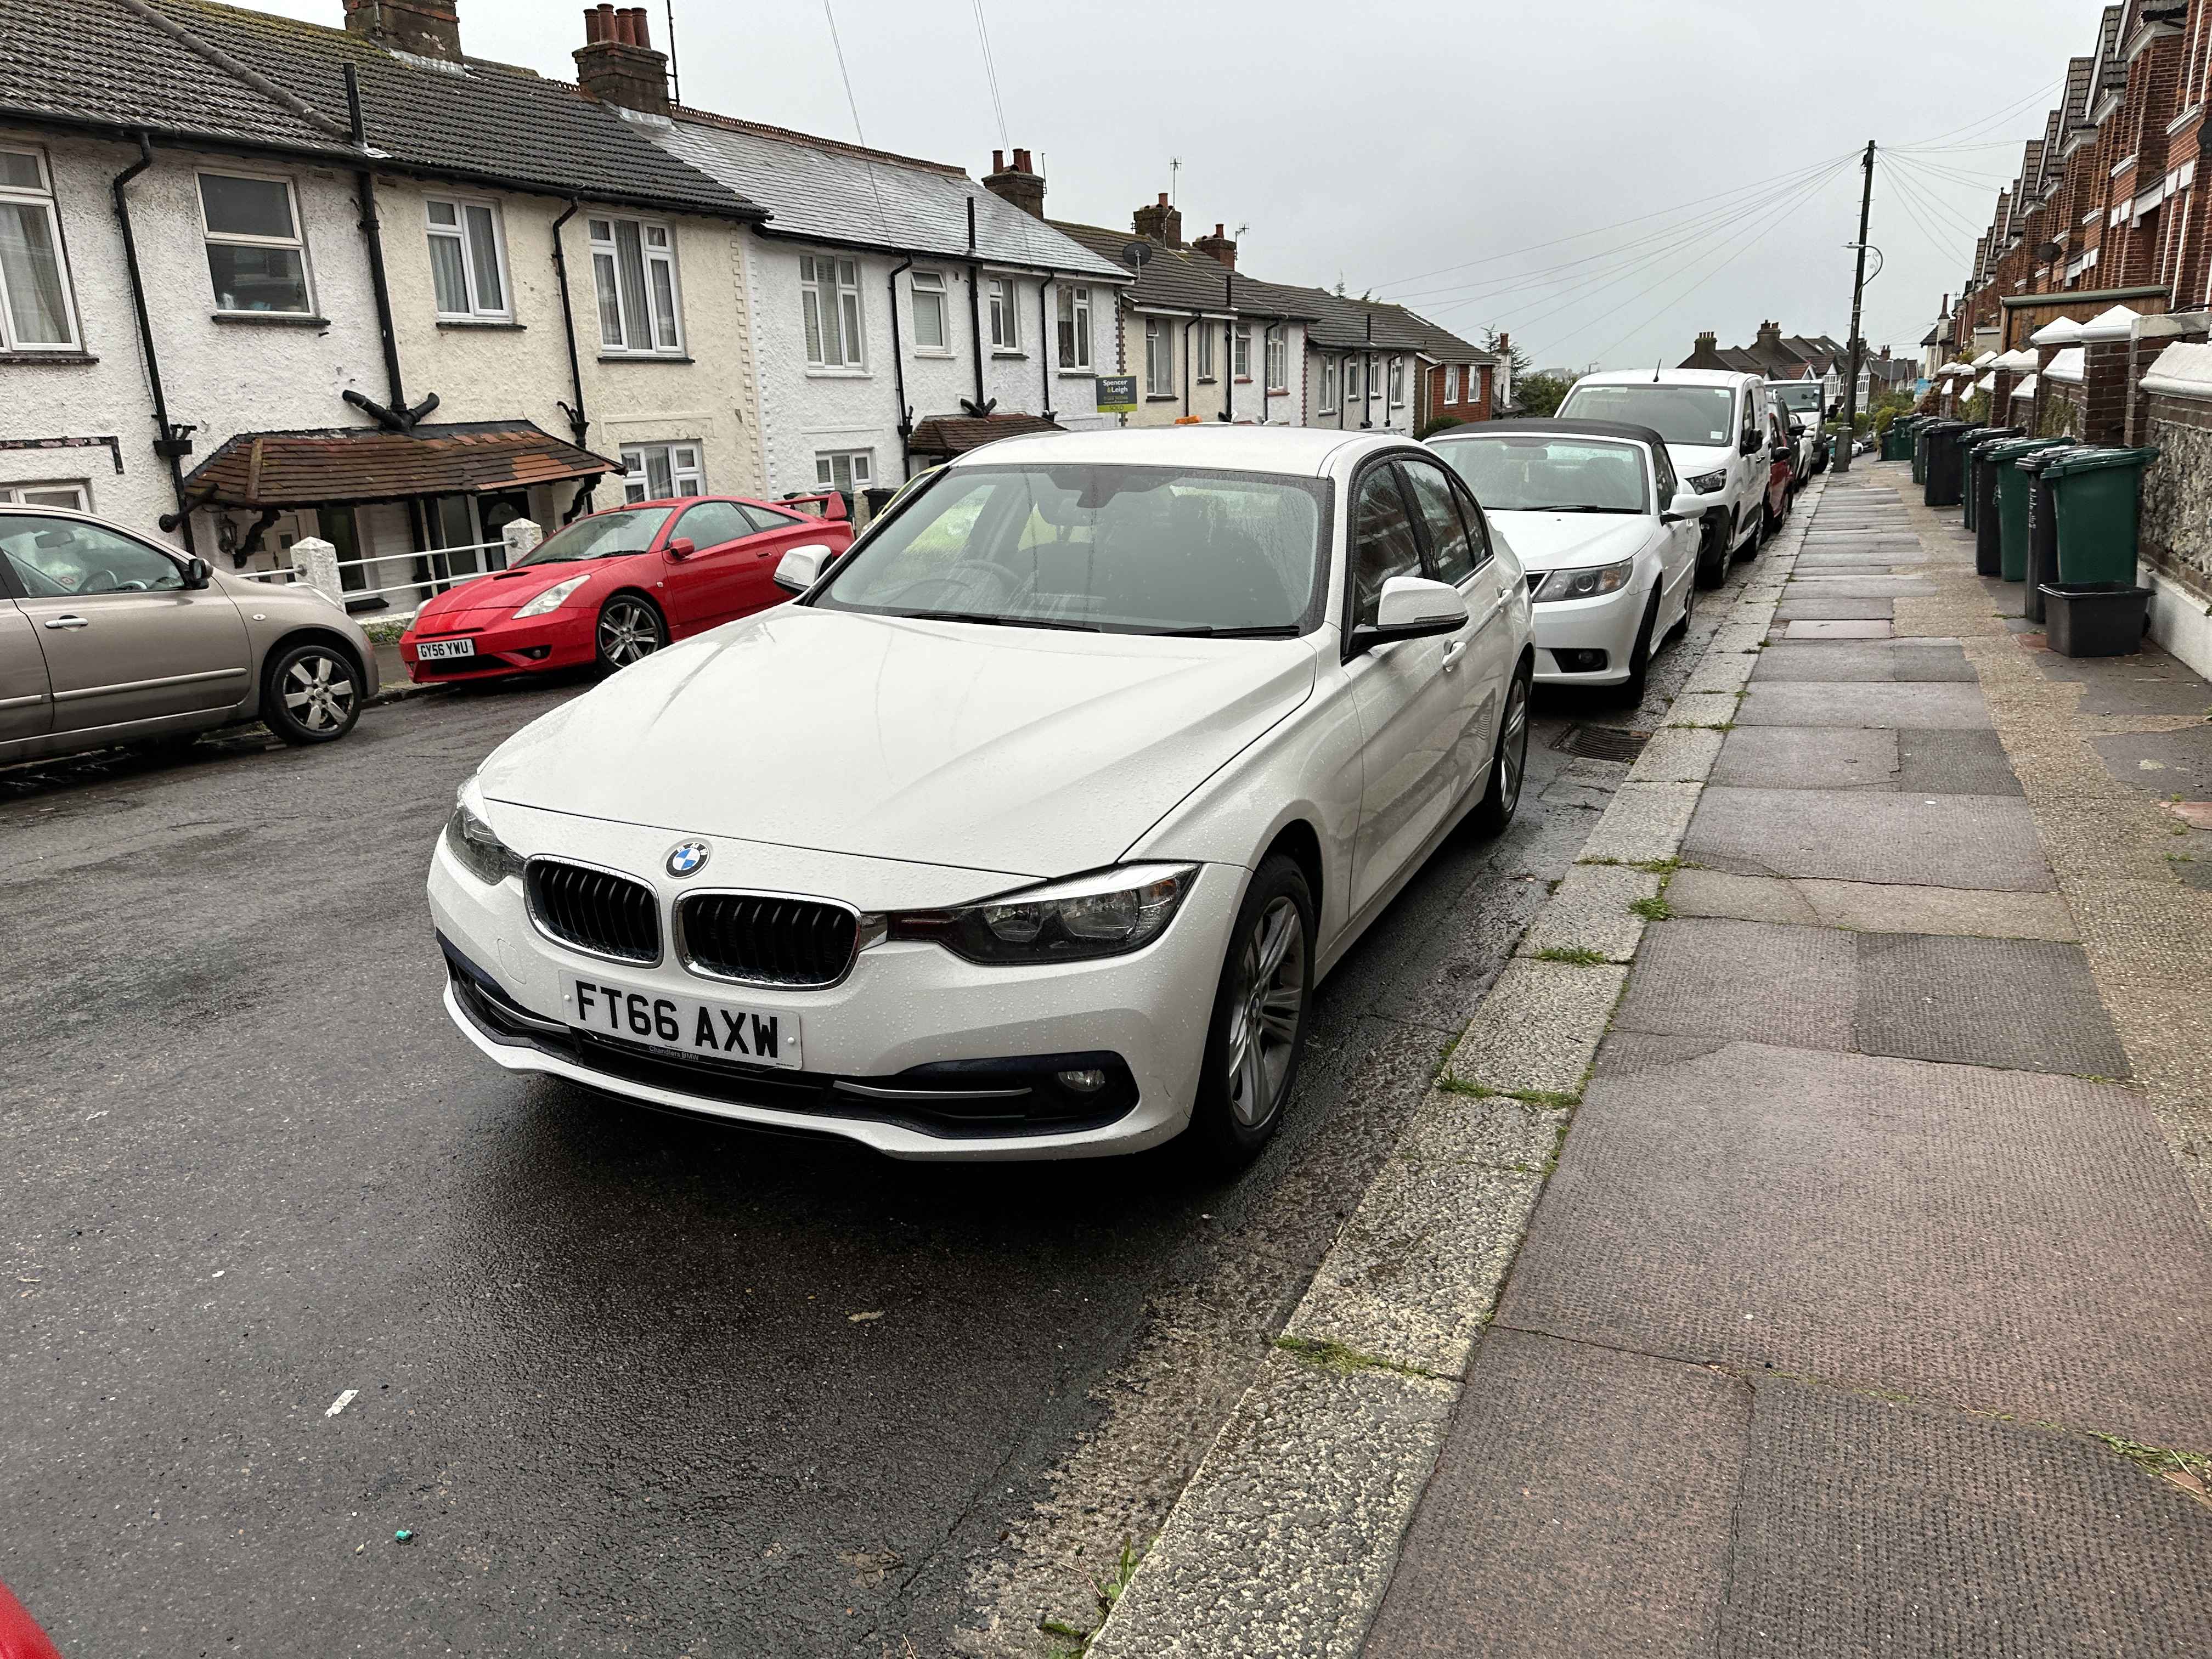 Photograph of FT66 AXW - a White BMW 3 Series parked in Hollingdean by a non-resident who uses the local area as part of their Brighton commute. The first of seven photographs supplied by the residents of Hollingdean.